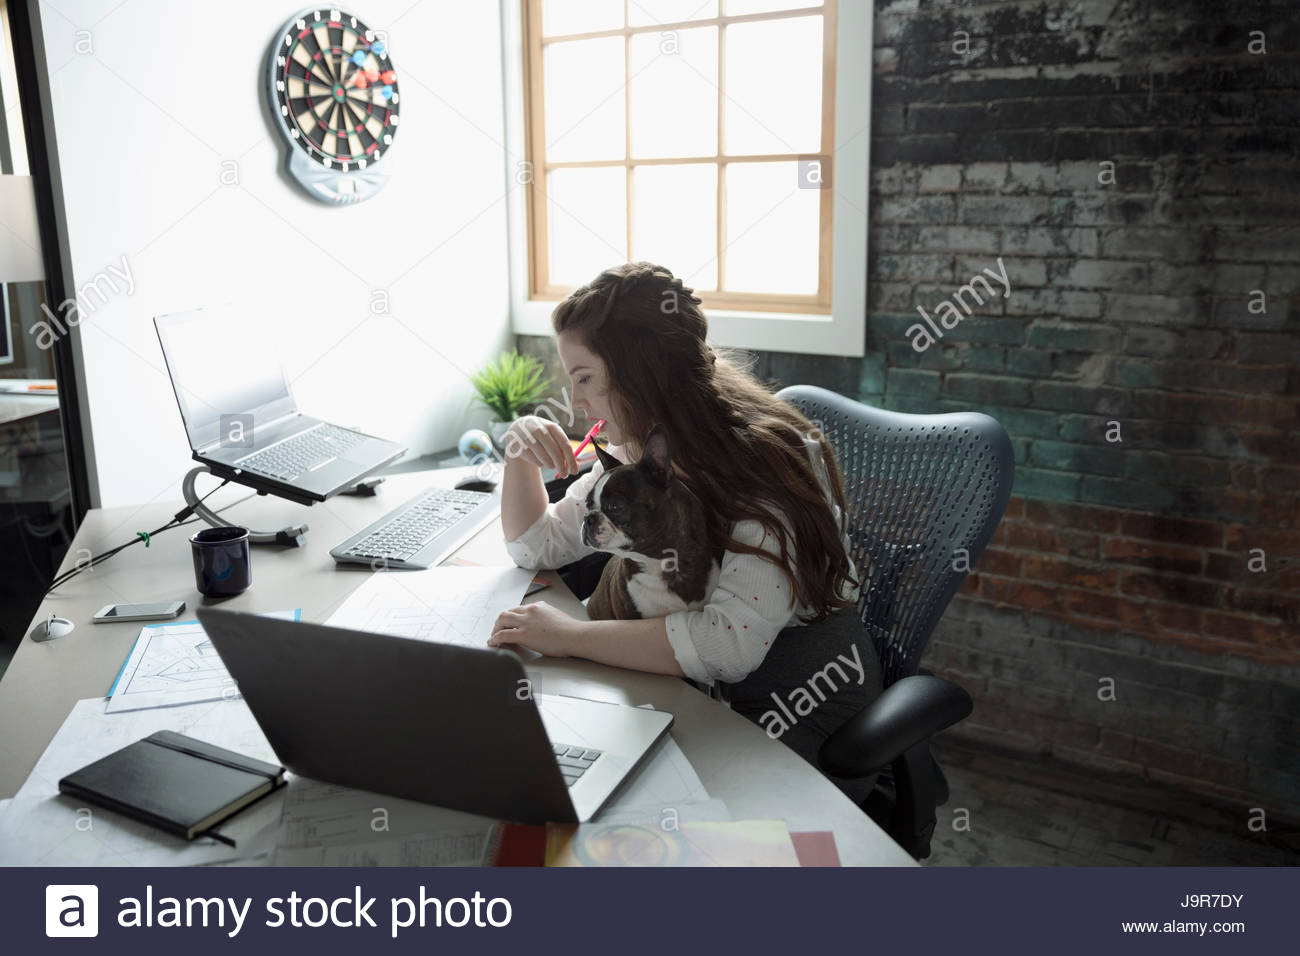 Creative businesswoman working with dog in lap at desk in office Banque D'Images